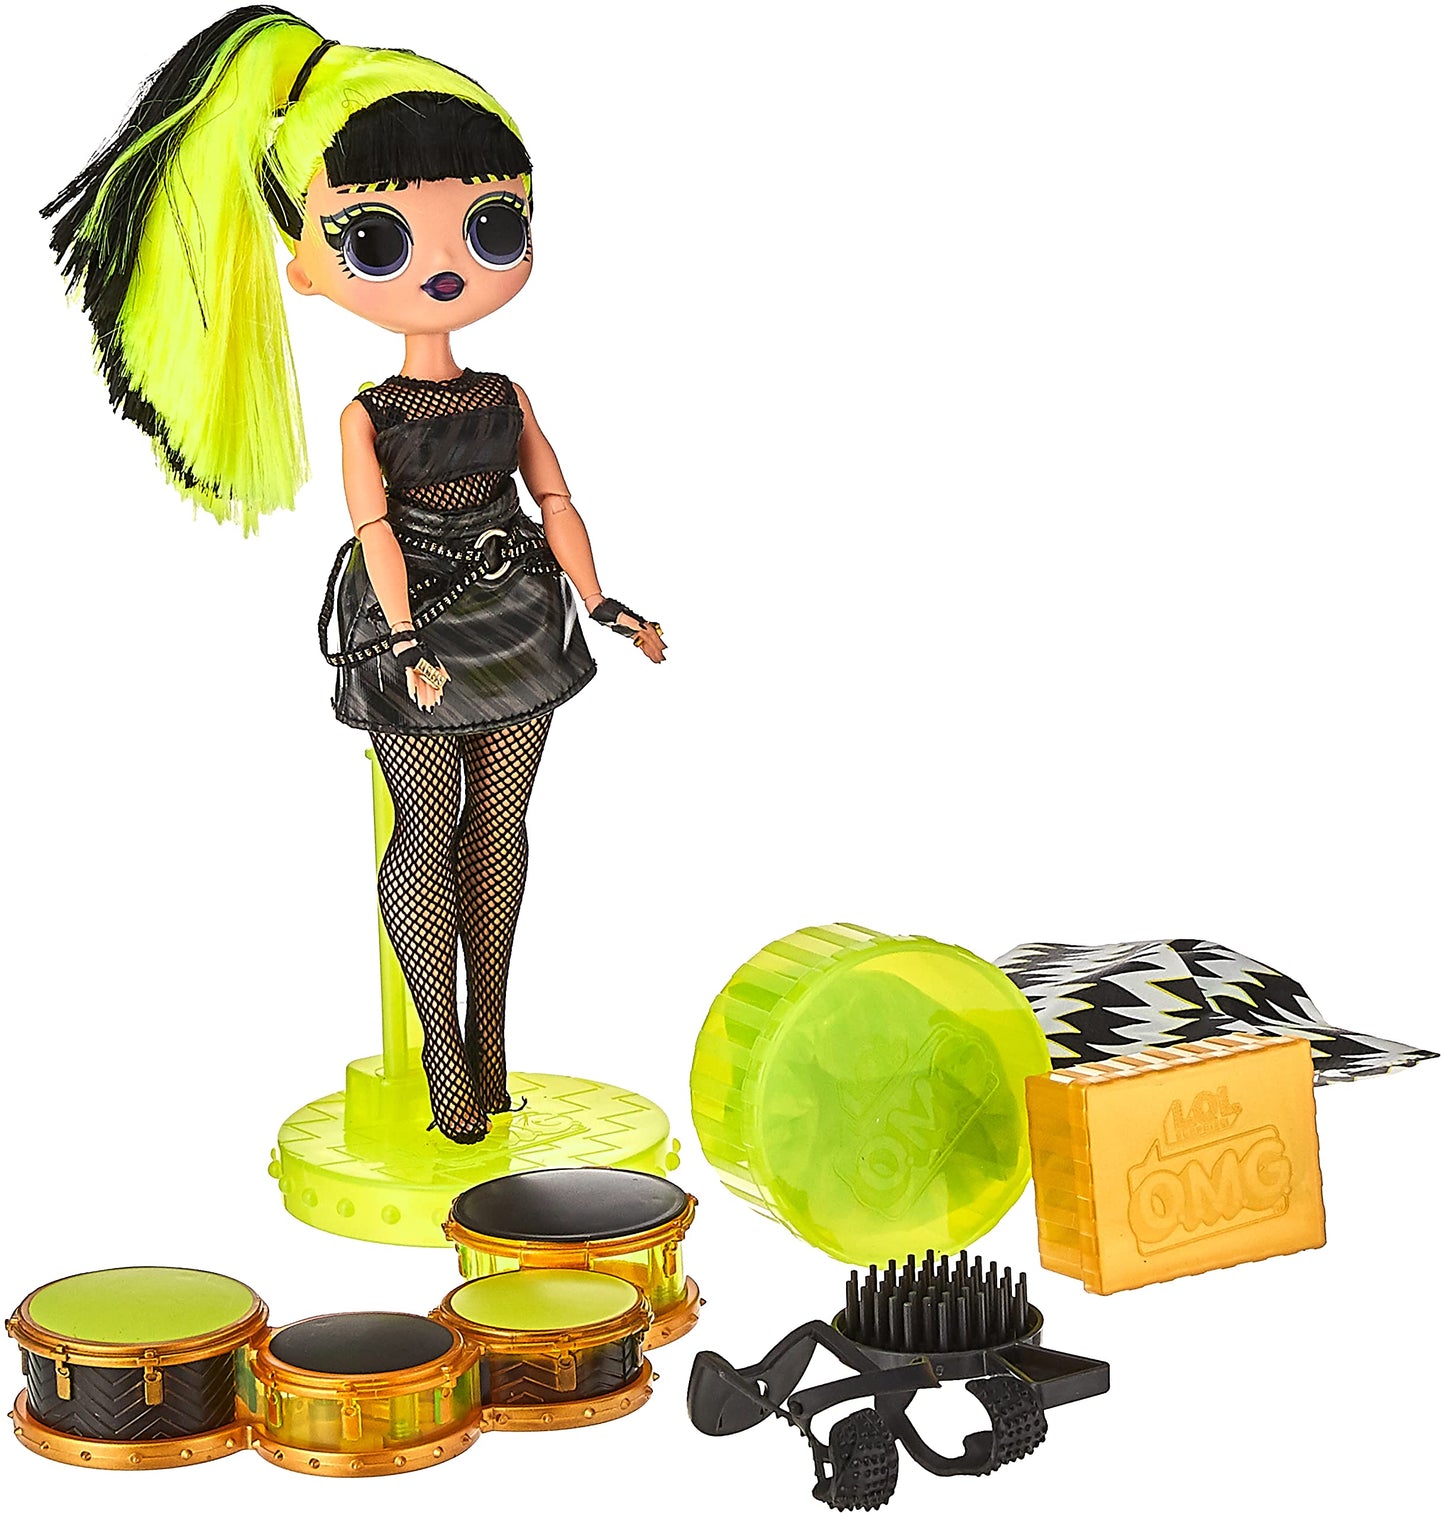 L.O.L. Surprise! OMG Remix Rock Bhad Gurl Fashion Doll with 15 Surprises Including Drums, Outfit, Shoes, Stand, Lyric Magazine, and Record Player Playset -Toys for Girls Boys Ages 4 5 6 7+,Multicolor